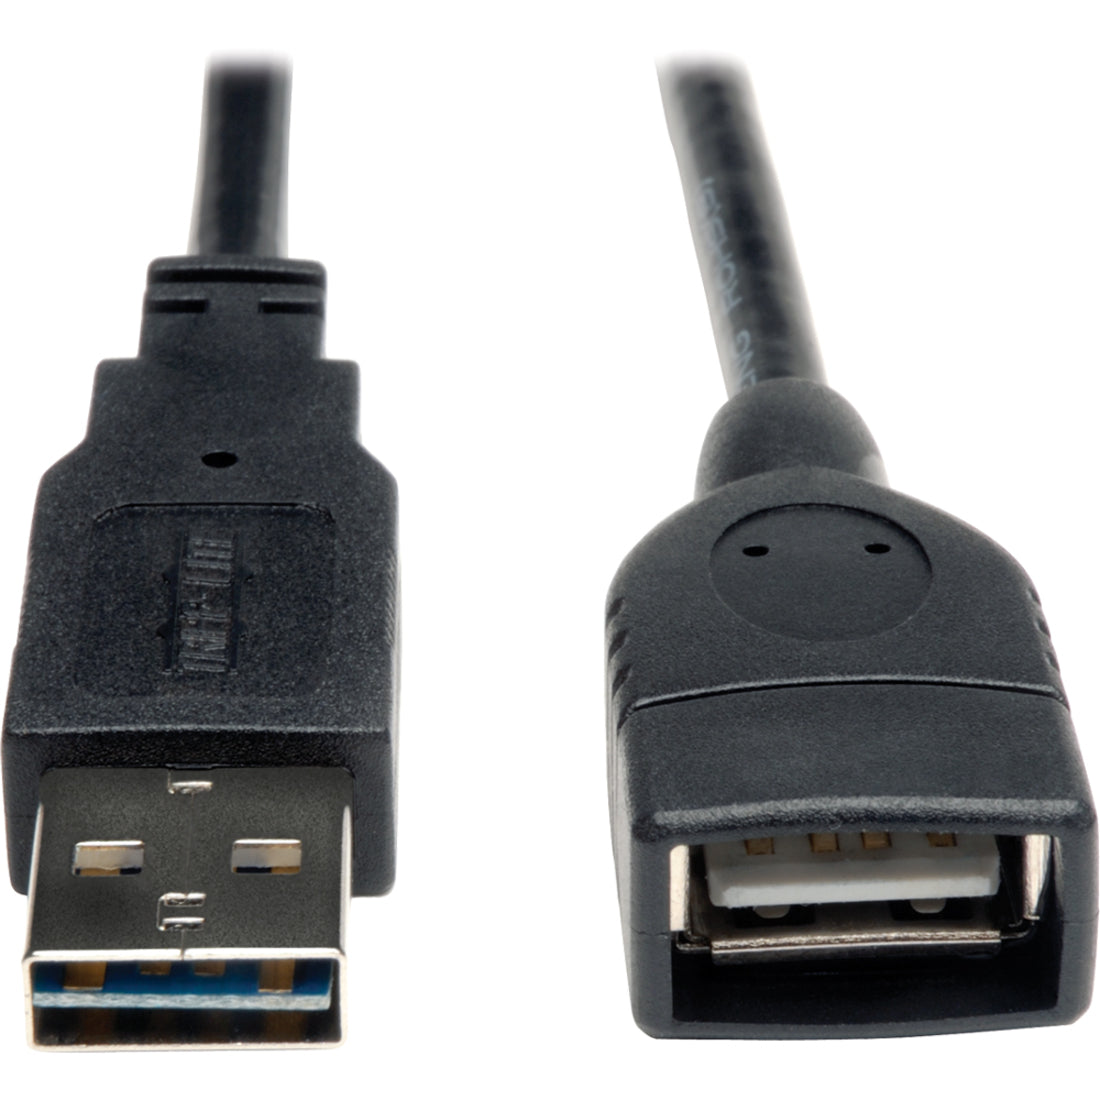 Tripp Lite UR024-001 Universal Reversible USB 2.0 A-Male to A-Female Extension Cable - 1ft, Molded, Shielded, Gold Plated